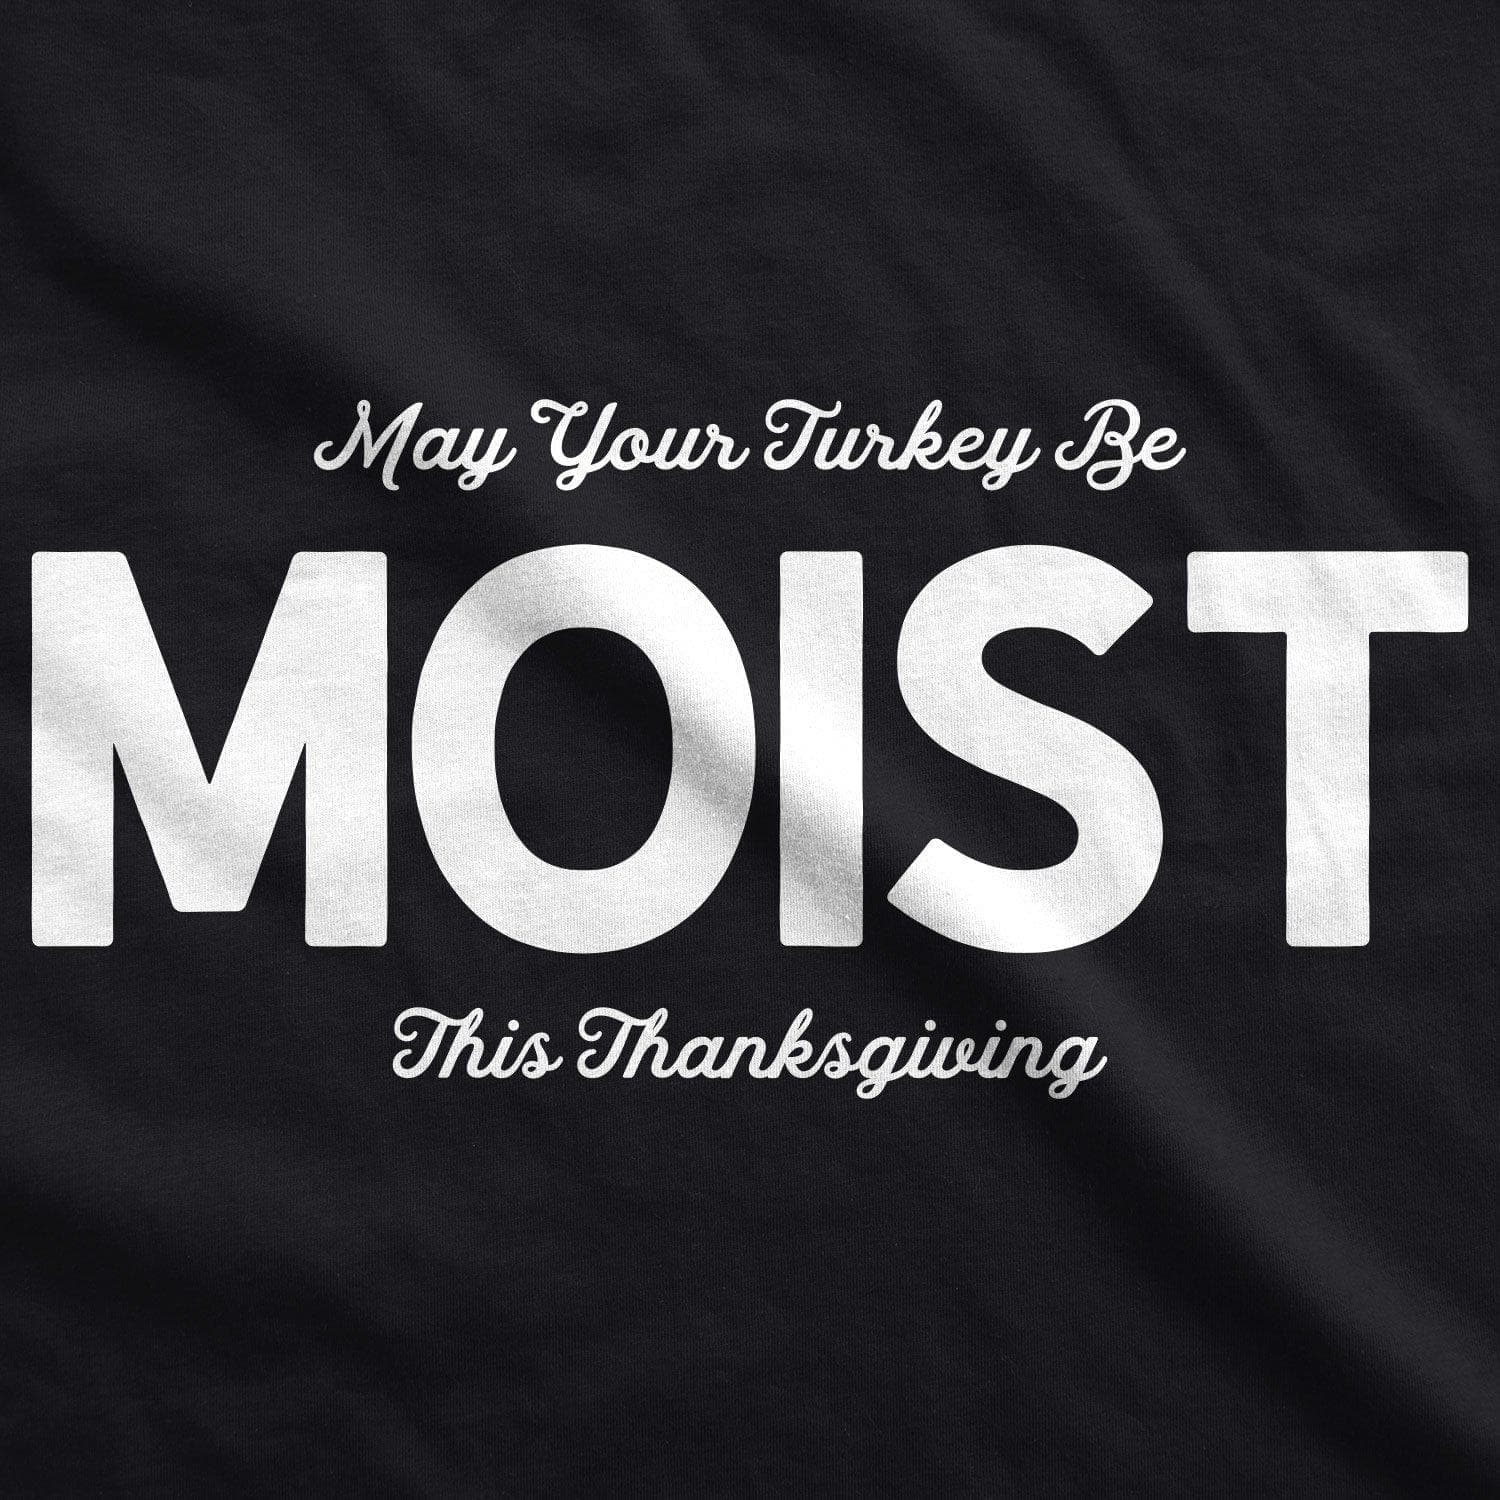 May Your Turkey Be Moist This Thanksgiving Men's Tshirt - Crazy Dog T-Shirts